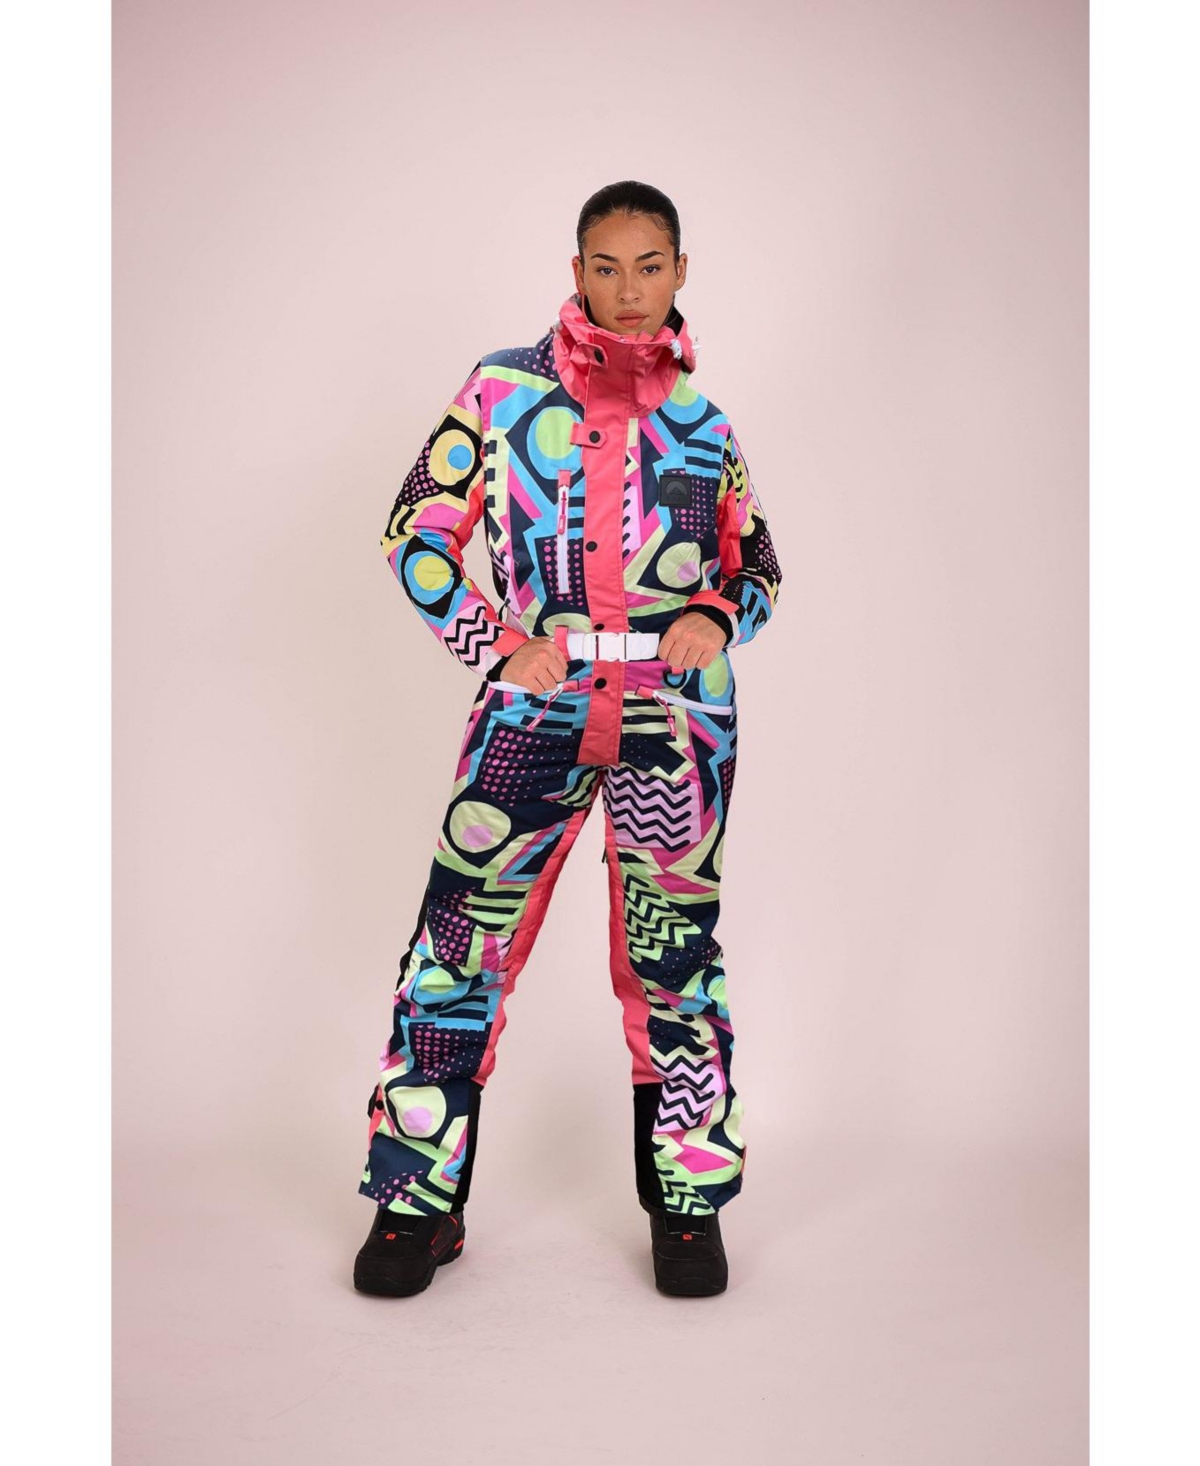 Saved by The Bell Curved Women's Ski Suit - Multi